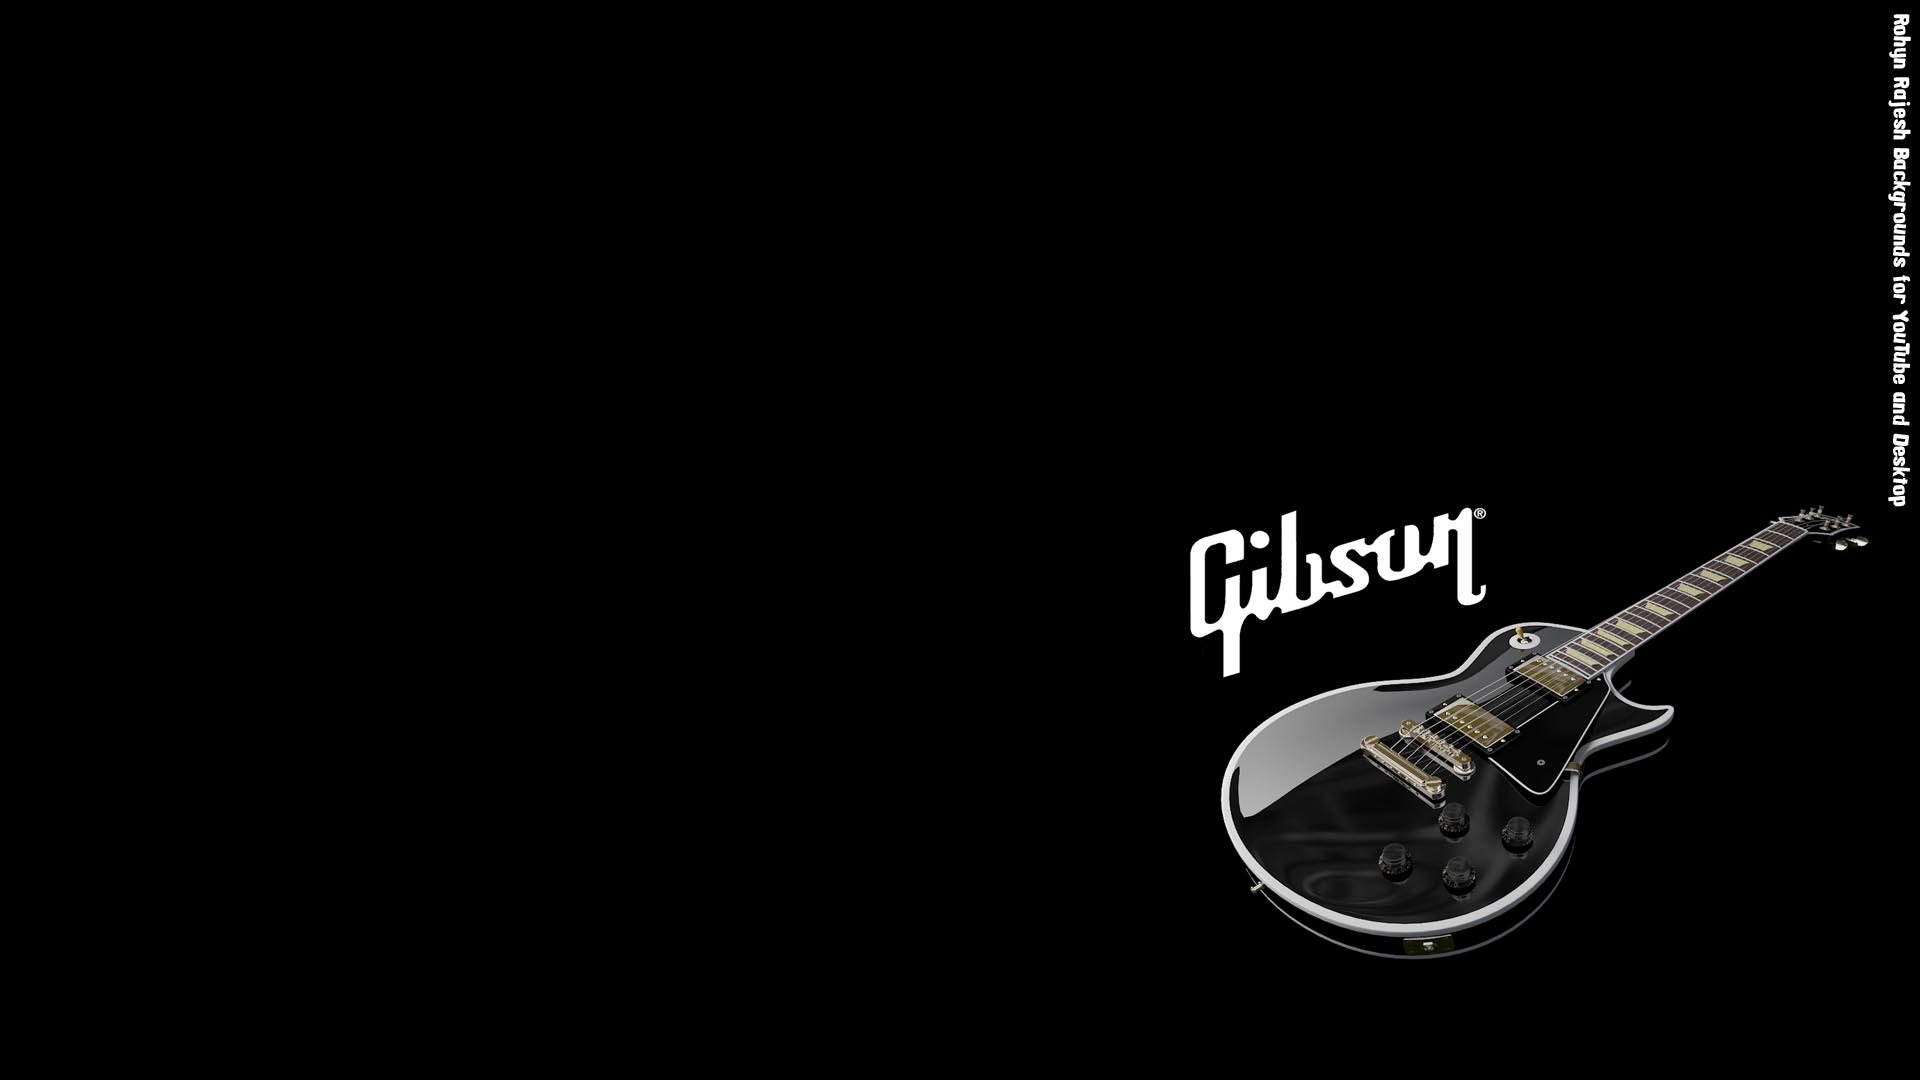 Les Paul Gibson HD Background By Rohynrajesh